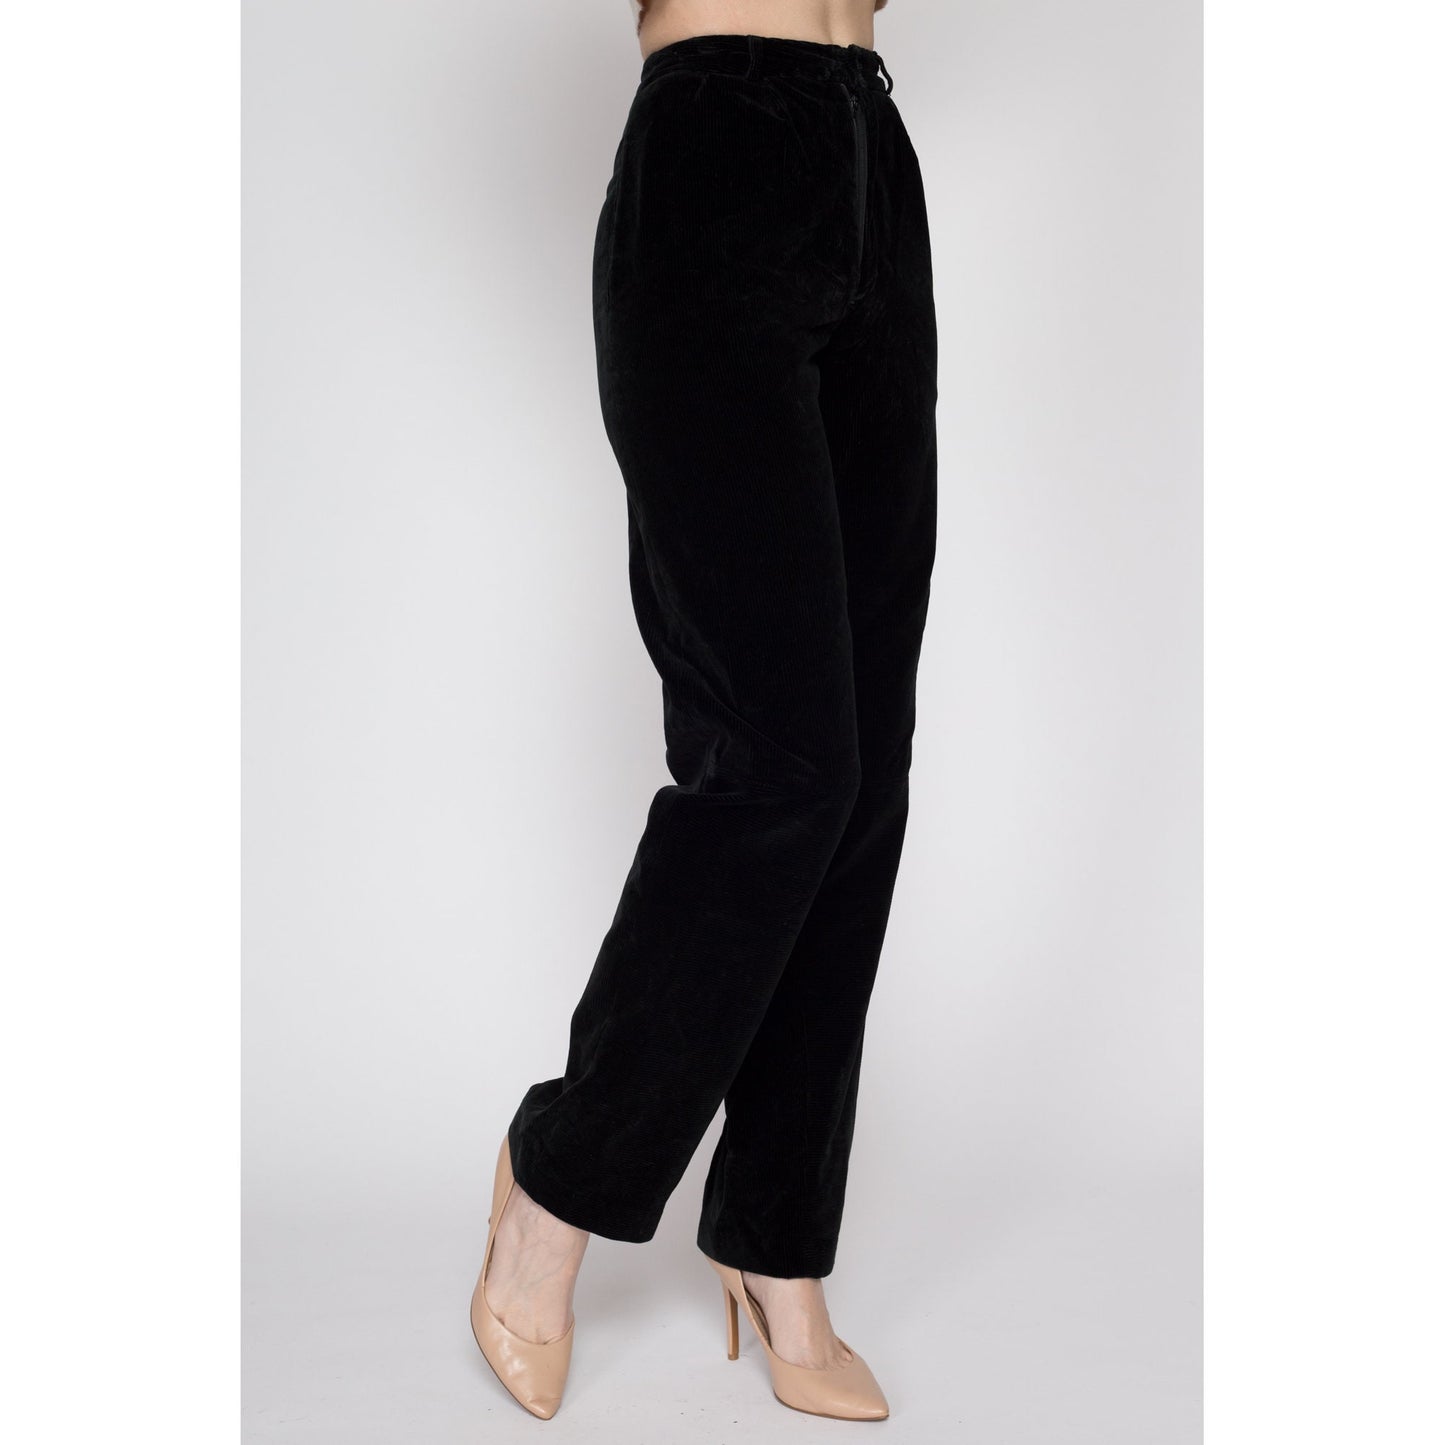 XS 70s Black Corduroy High Waisted Pants 22.5" | Retro Vintage Tall Long Inseam Pleated Trousers